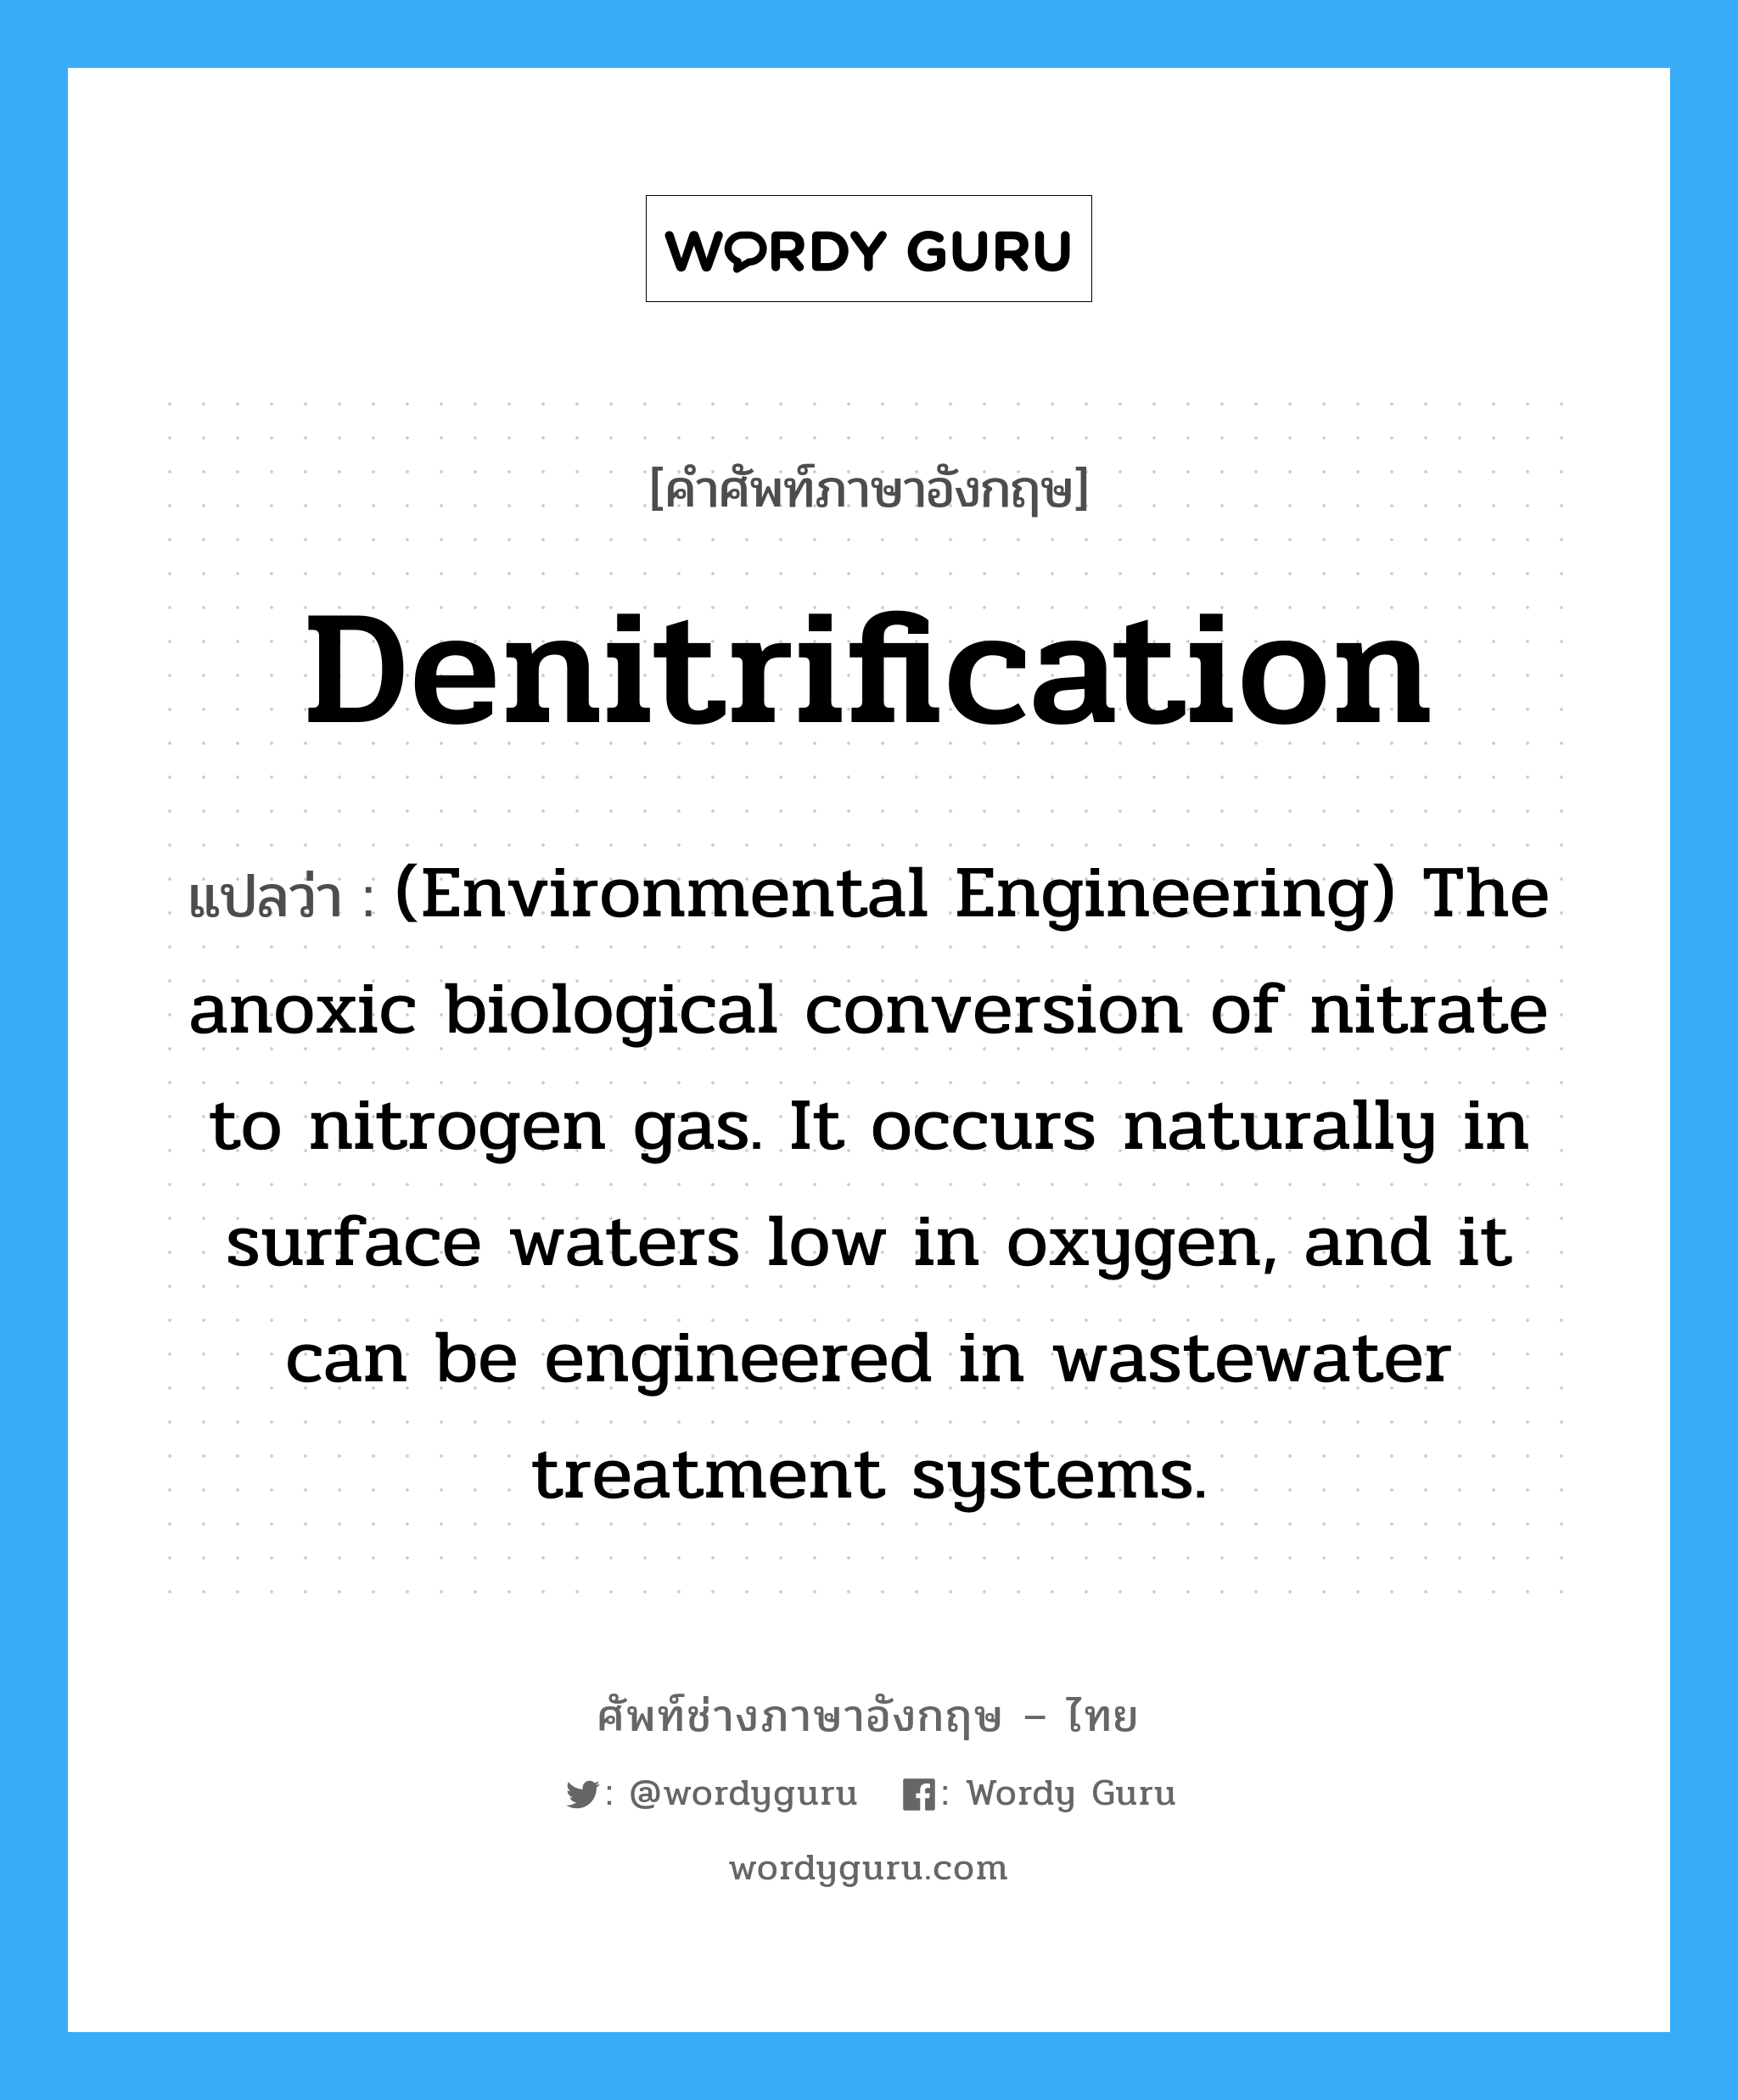 Denitrification แปลว่า?, คำศัพท์ช่างภาษาอังกฤษ - ไทย Denitrification คำศัพท์ภาษาอังกฤษ Denitrification แปลว่า (Environmental Engineering) The anoxic biological conversion of nitrate to nitrogen gas. It occurs naturally in surface waters low in oxygen, and it can be engineered in wastewater treatment systems.